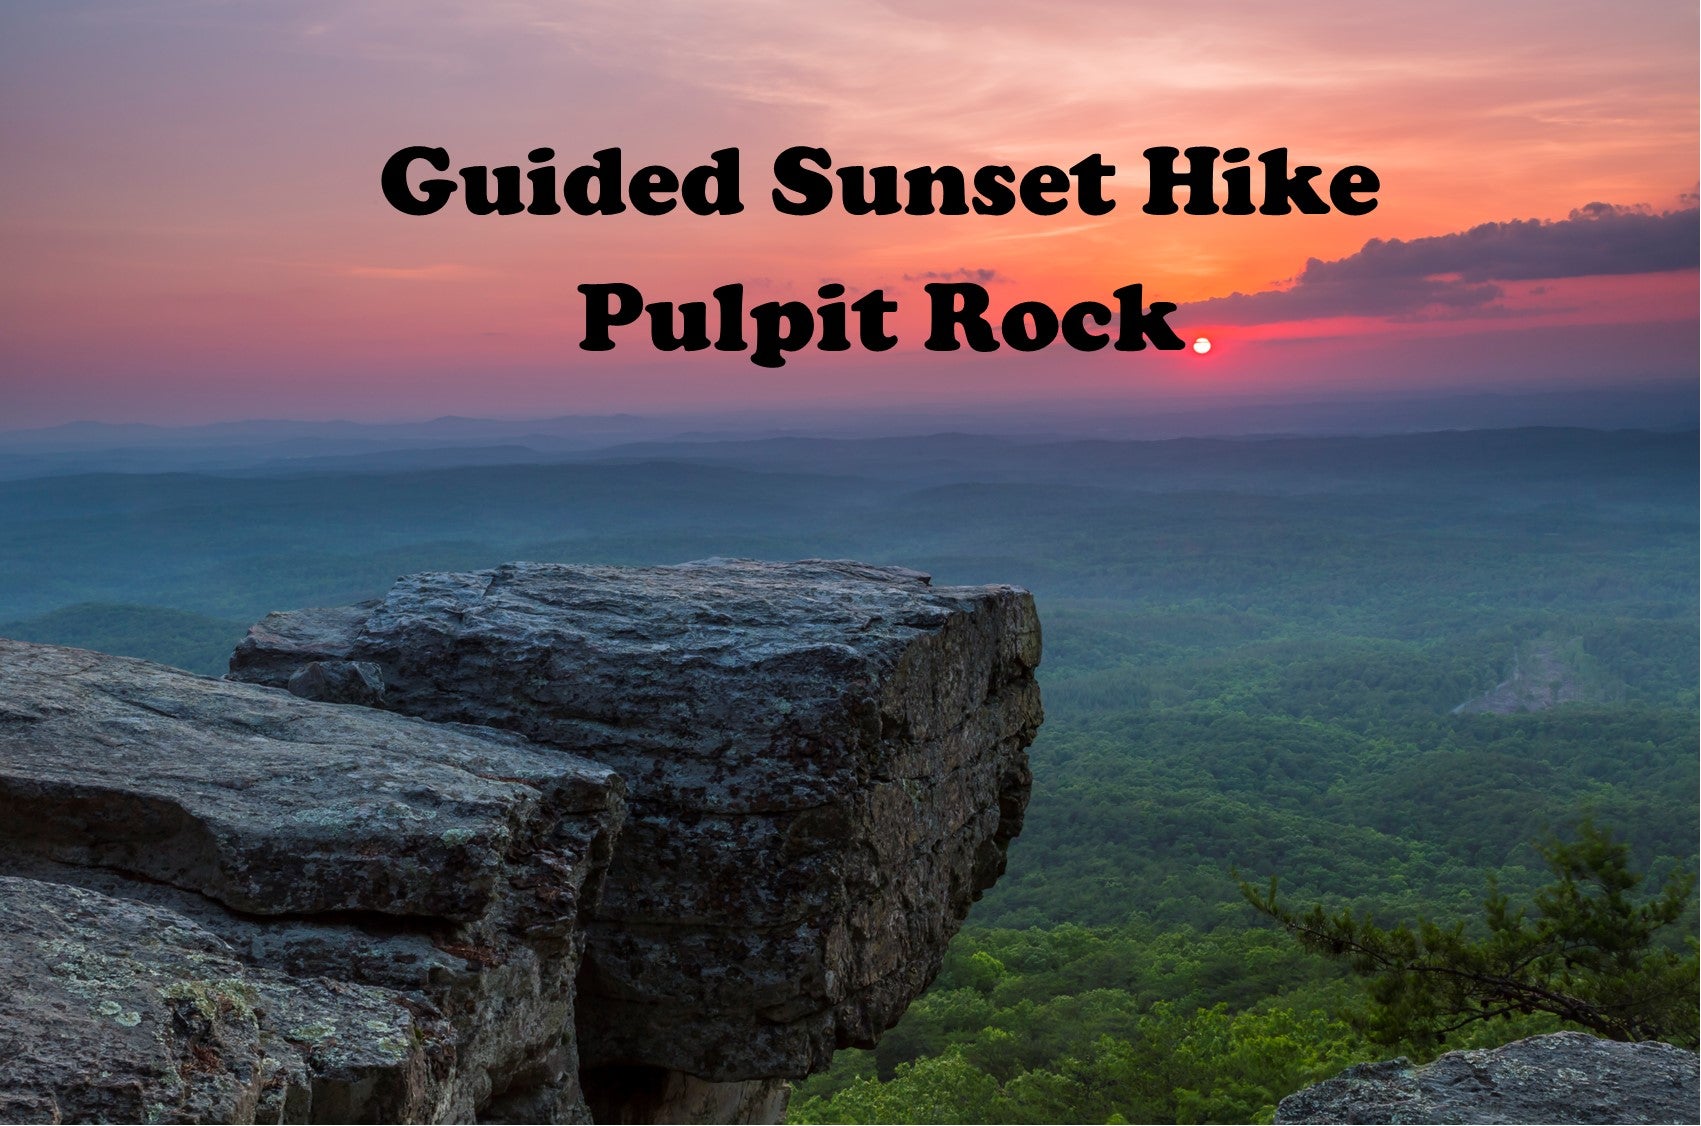 Guided Sunset Hike at Pulpit Rock